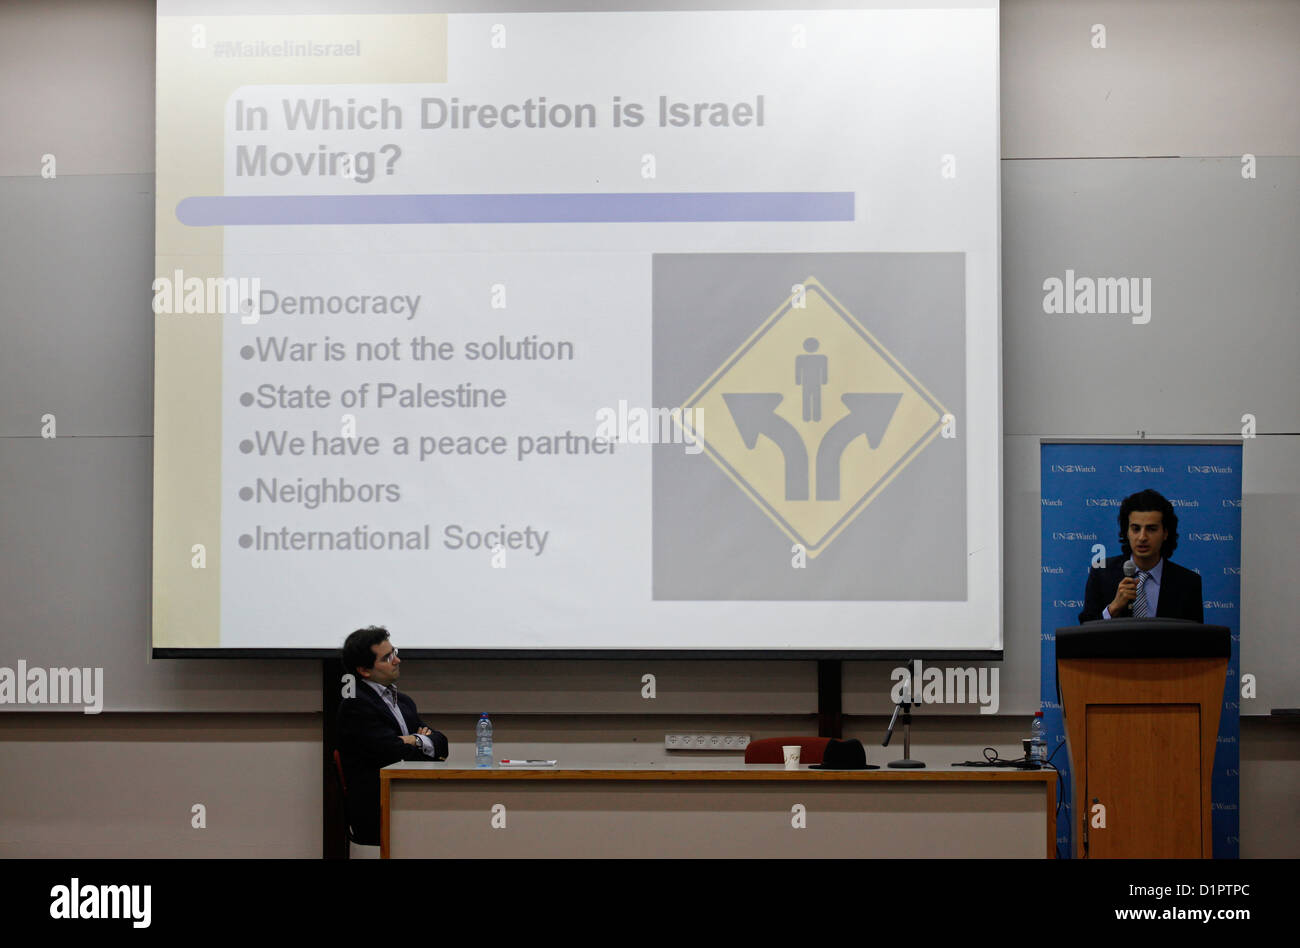 Maikel Nabil Sanad, an Egyptian blogger and political activist carries a speech in Tel Aviv University on 02 January 2012. Maikel became famous in 2010 for refusing to serve in the Egyptian army, then in 2011 for his role in the Egyptian revolution. He is known for promoting liberal democratic values in Egypt, and campaigning for peaceful relations between Egypt and Israel. Stock Photo